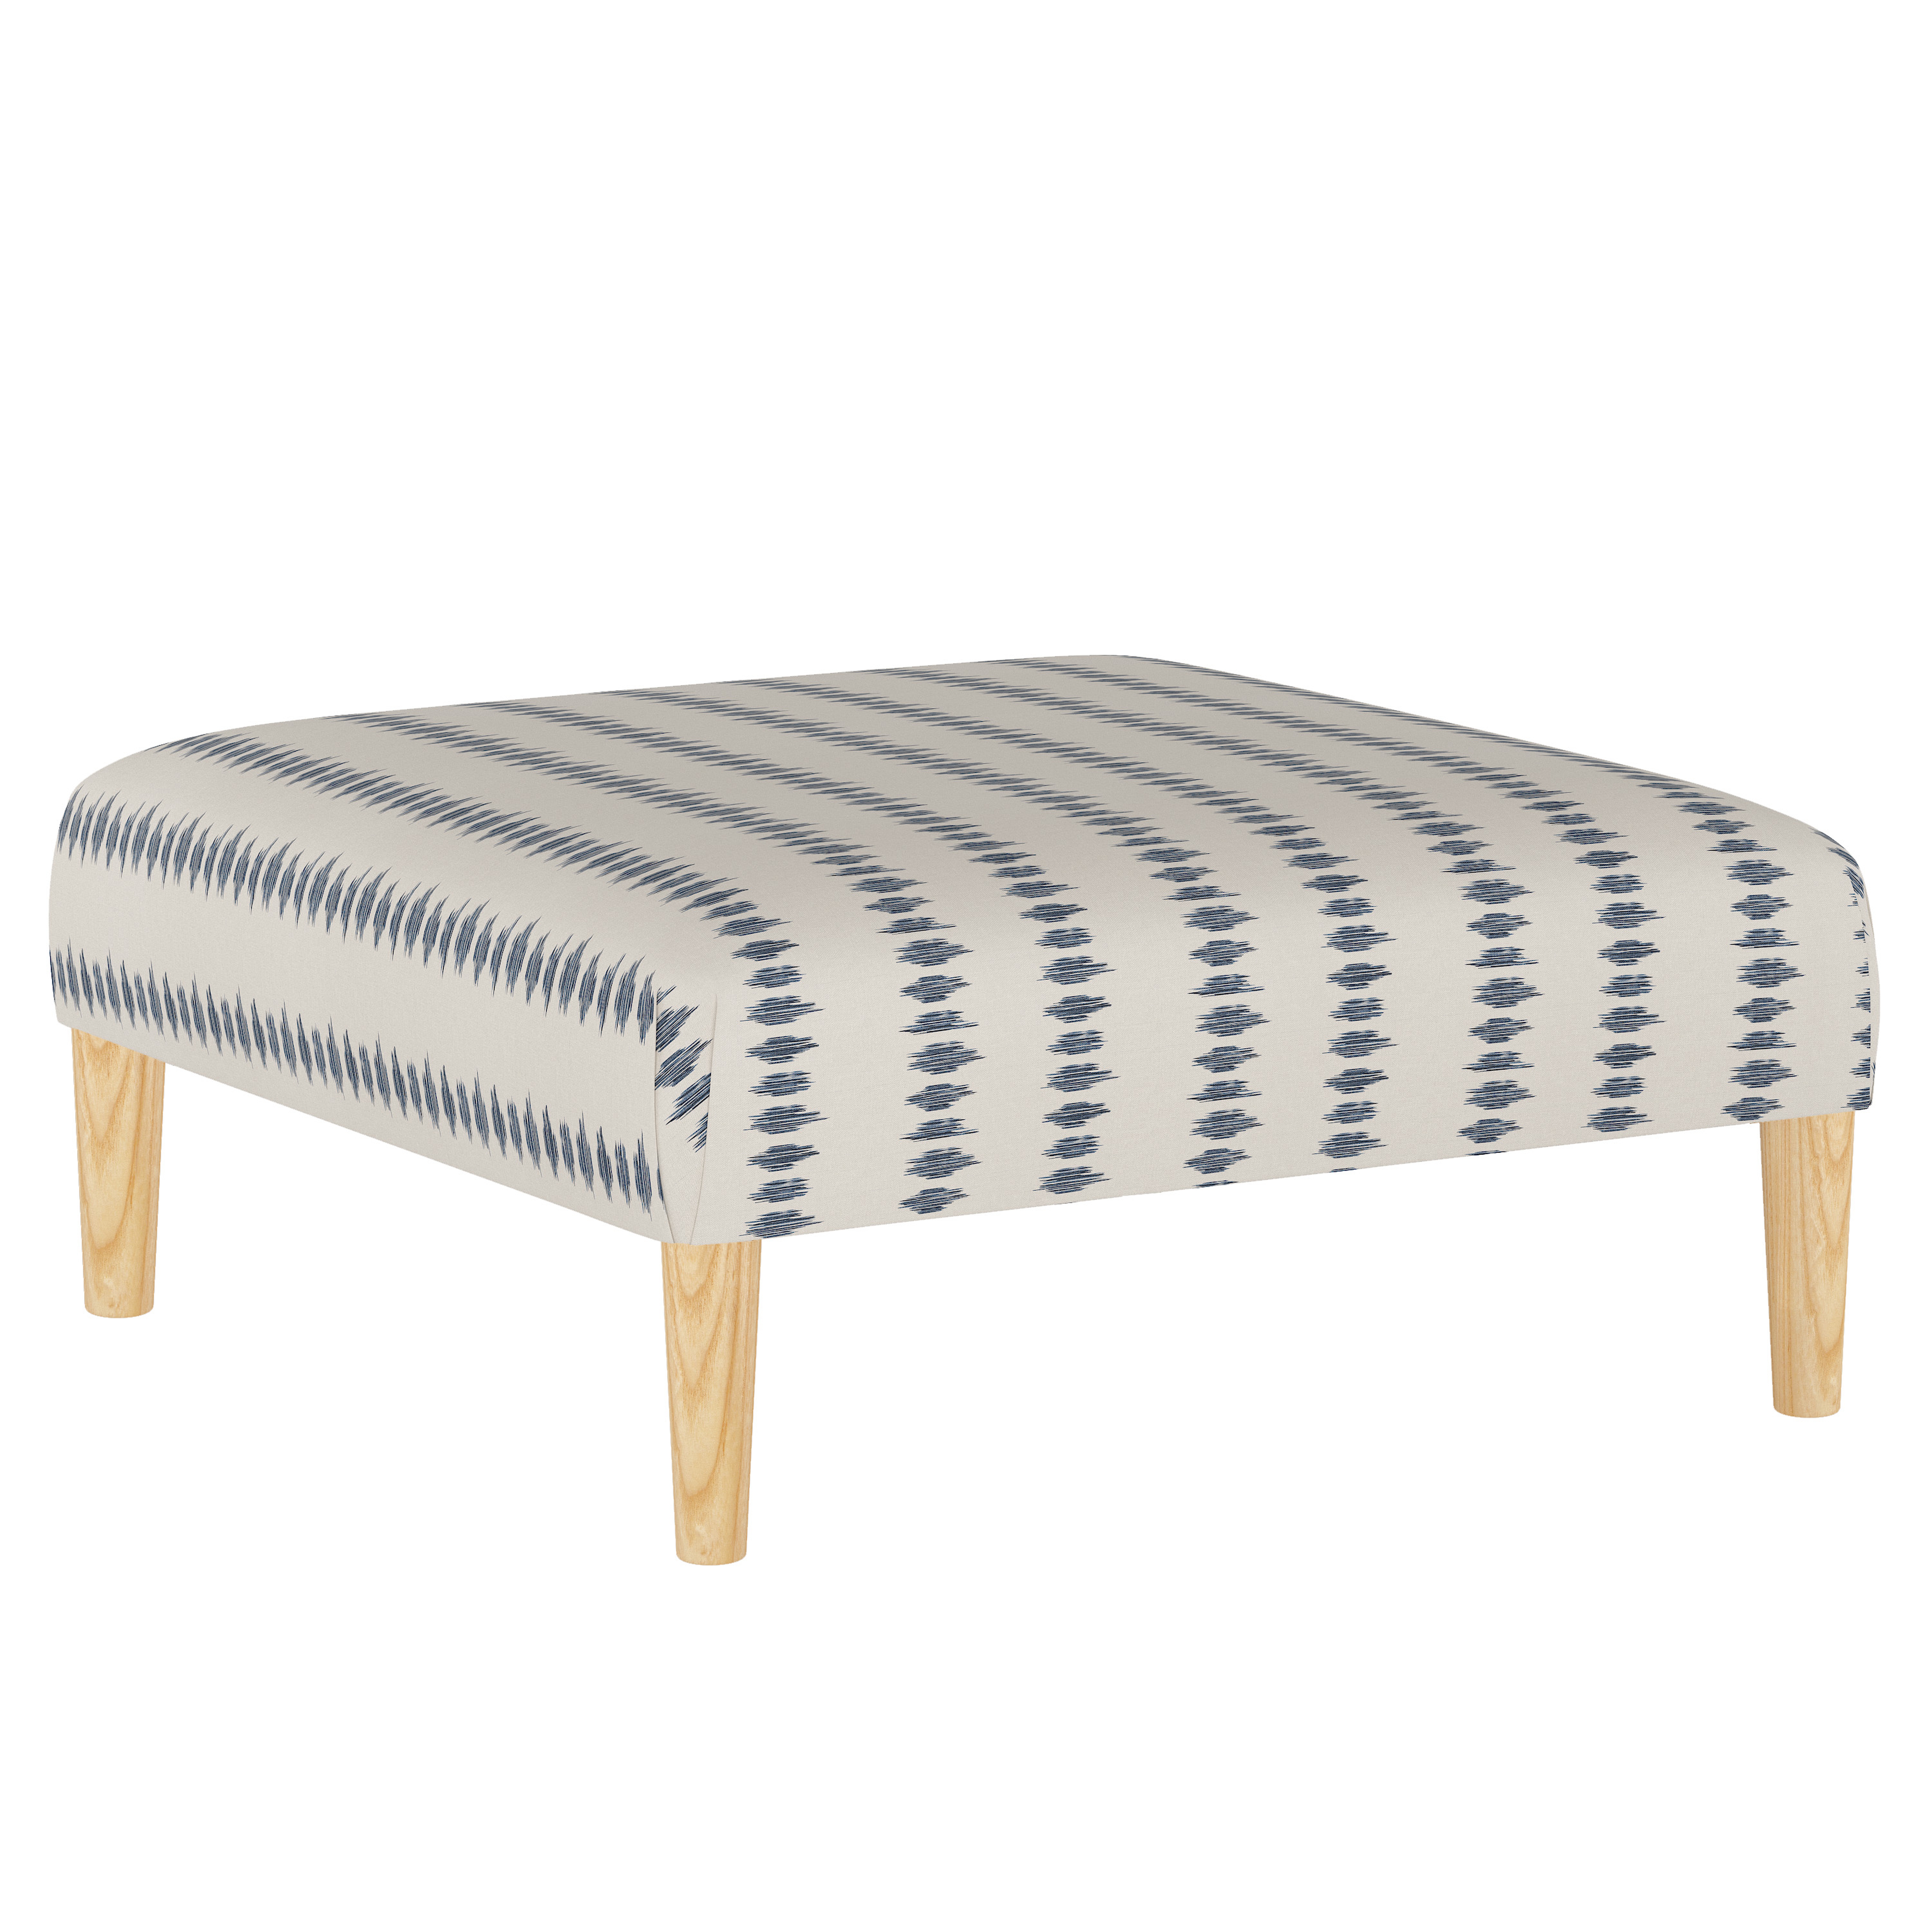 Algren Cocktail Ottoman with Cone Legs in Ikat Scribble Slate Oga - Third & Vine